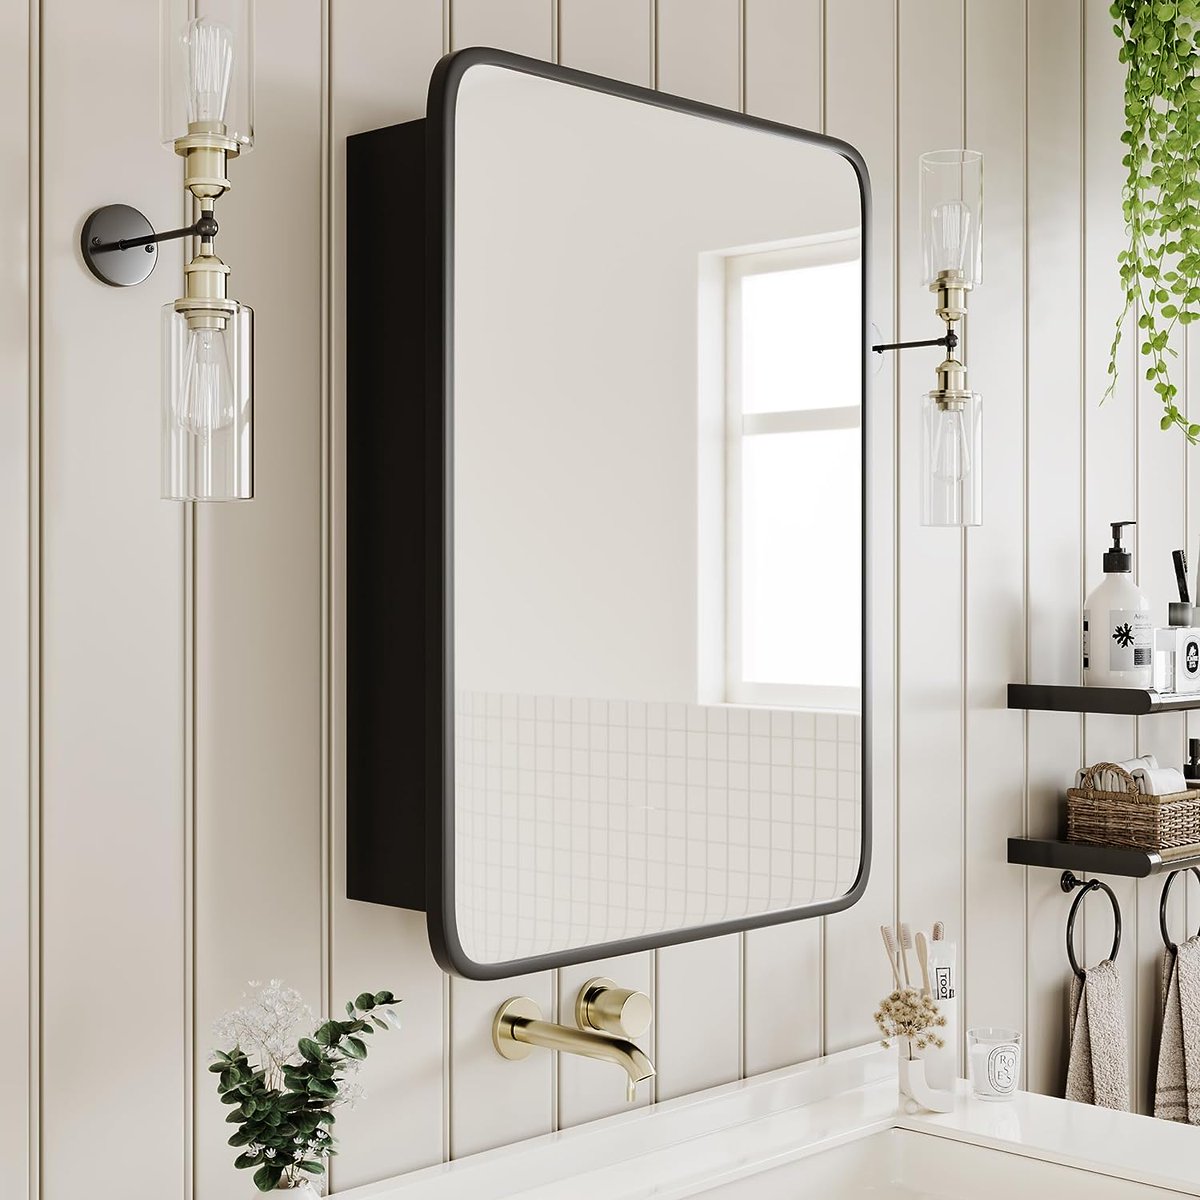 Oval Recessed Medicine Cabinet With Mirror of 2023 [Top Rated & Reviews $ Buying Guide]
bestbathroom.org/oval-recessed-…

#OvalMirrorMedicineCabinet
#RecessedCabinet
#BathroomStorage
#HomeDesign
#OvalMirrorDesign
#BathroomRemodel
#MirrorDecor
#FunctionalFurniture